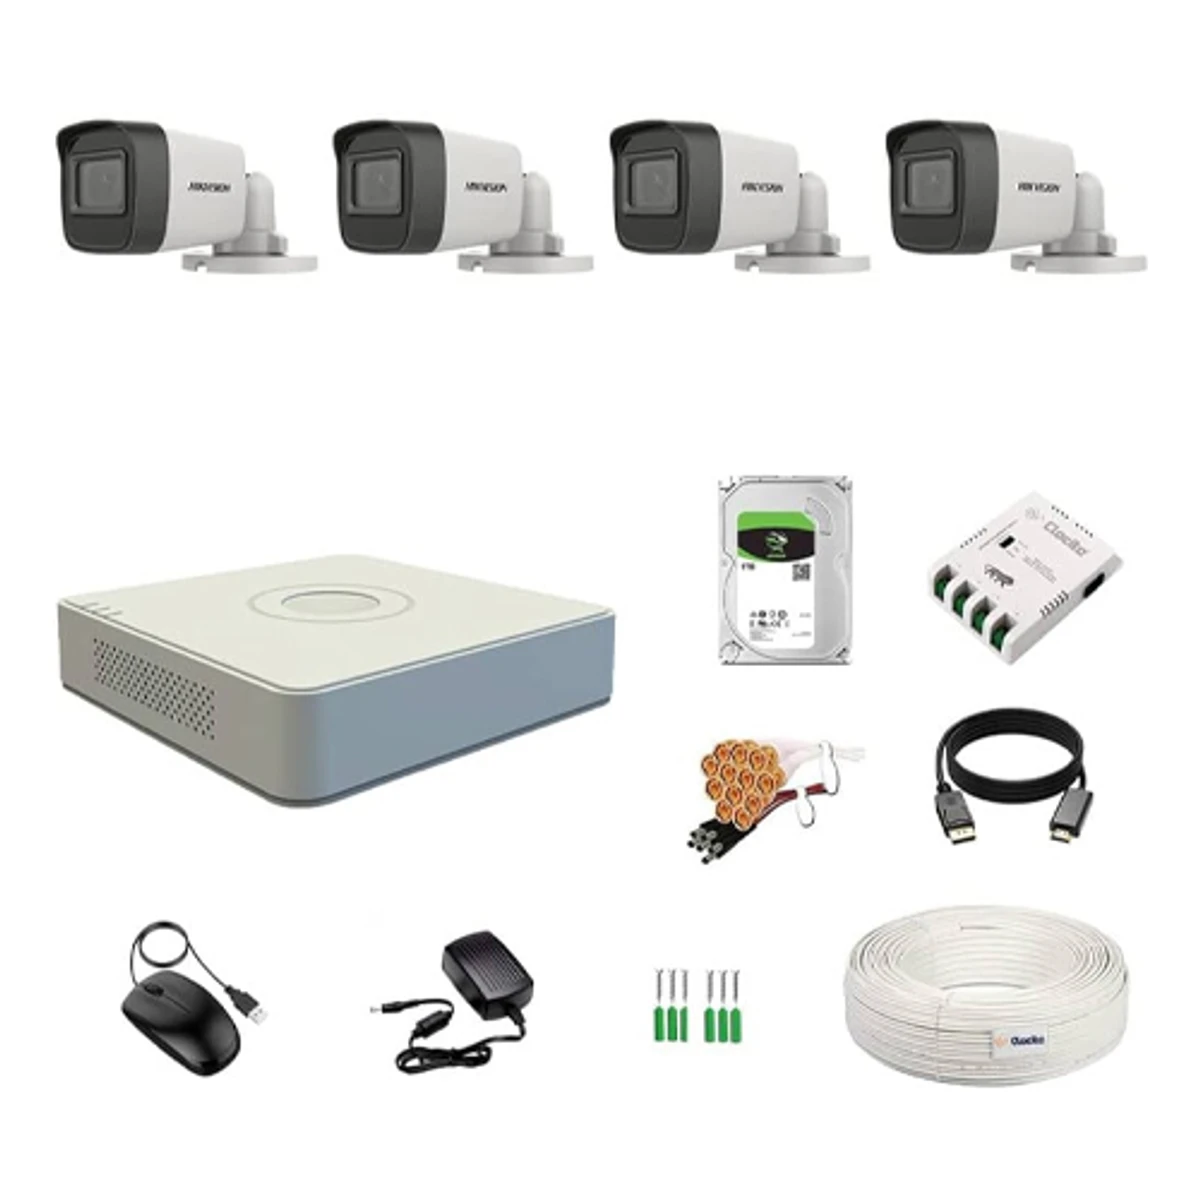 HIKvision CCTV Camera 4 Channel (Package With DVR, 1TB HDD)